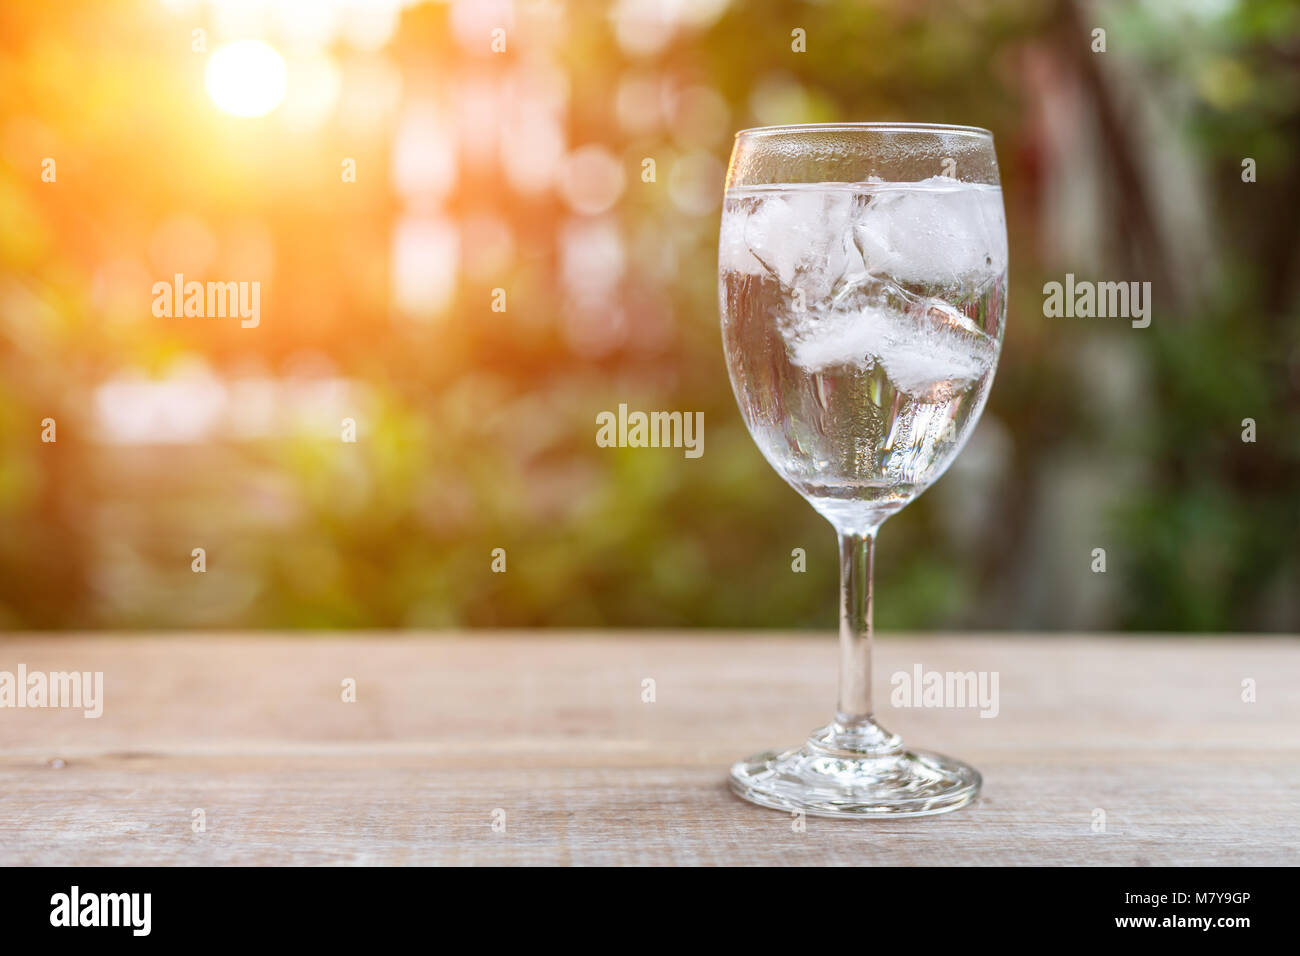 Close up glass of cold water with ice on table with blur nature garden background Stock Photo